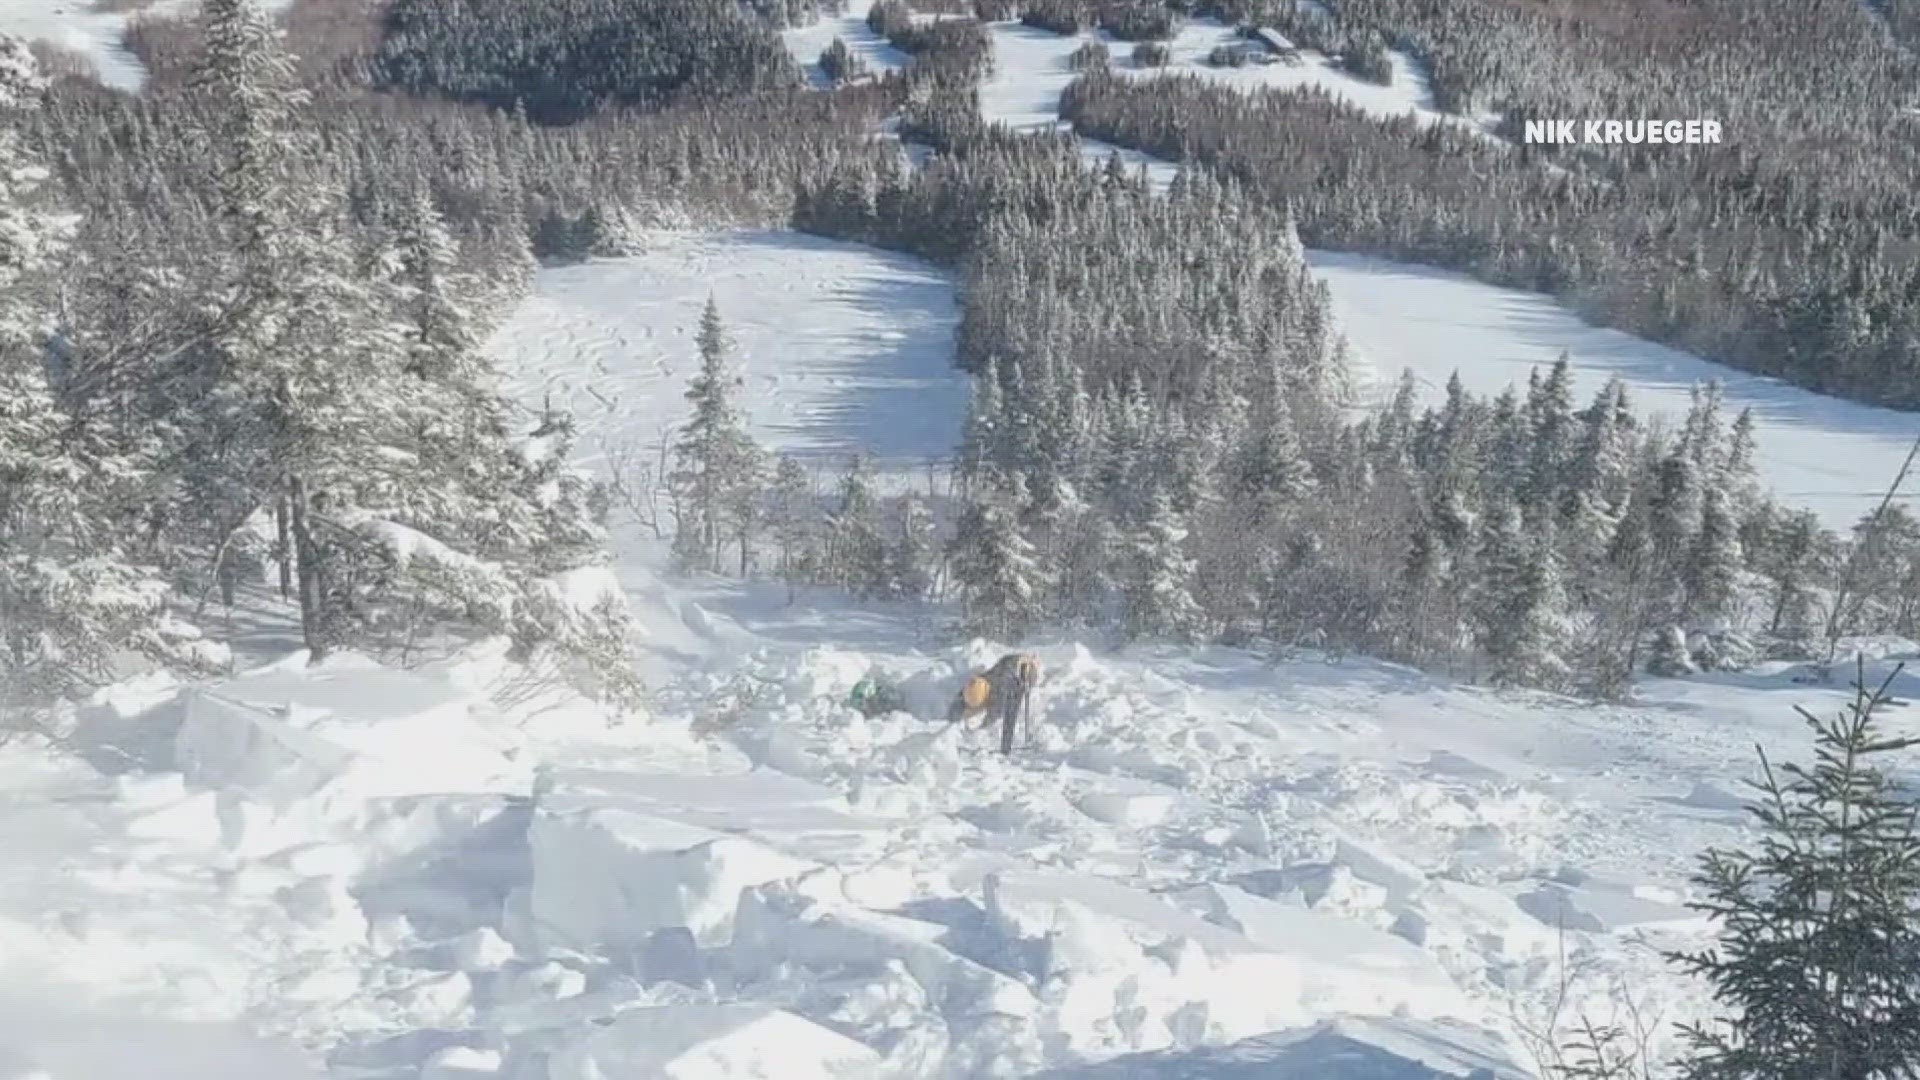 A skier who witnessed it unfold said he worked his way down the mountain and started digging the man out as fast as possible.